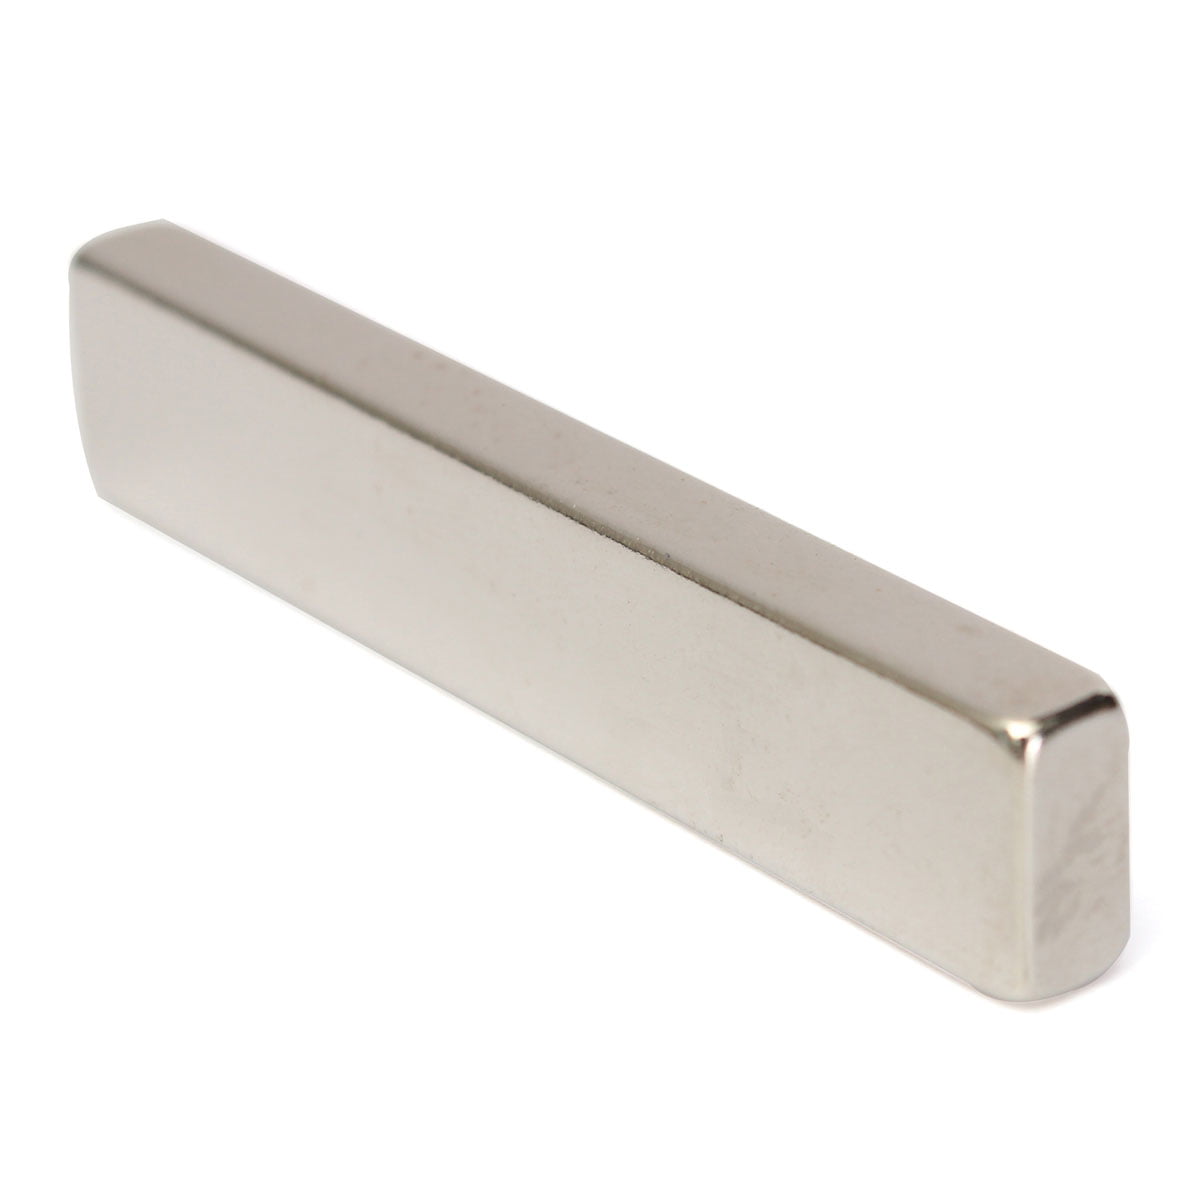 Details about  / N50 1 1//6 x 2//5 x 1//8 Neodymium Magnets Block Super Strong Magnet Materials